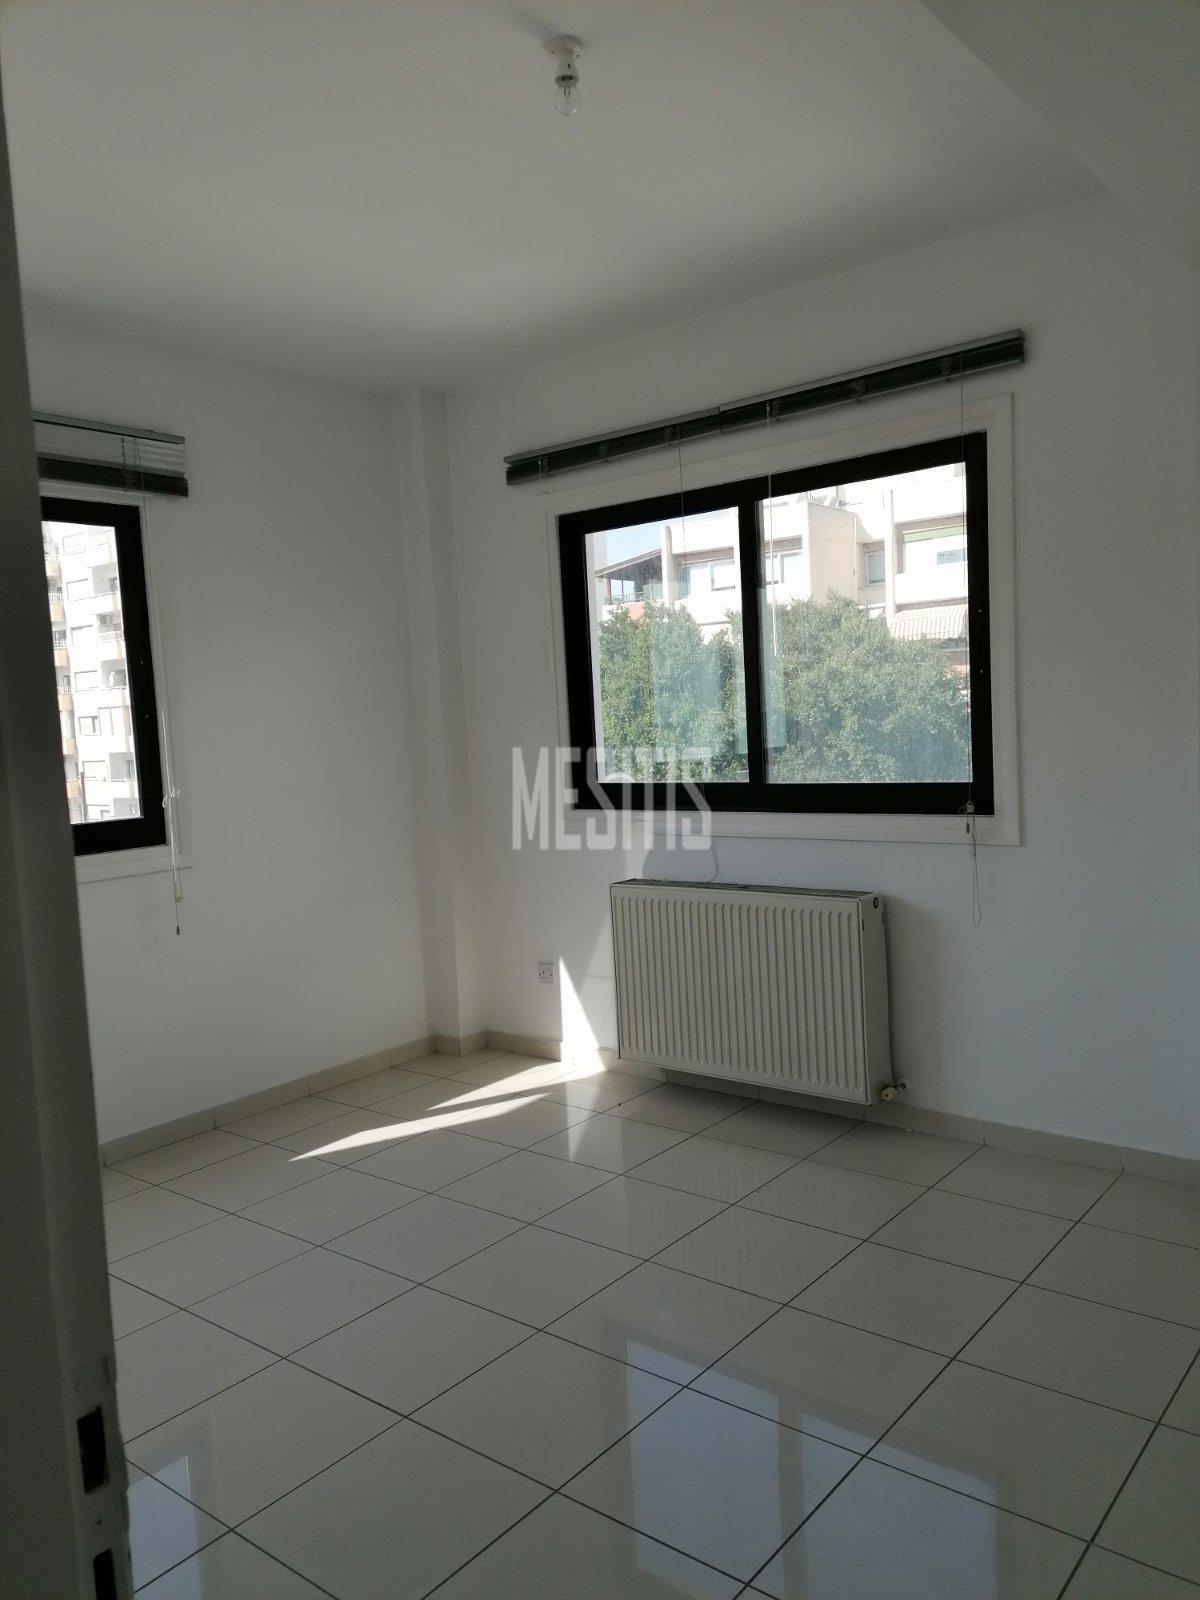 Spacious And Bright 3 Bedroom  Apartment For Rent In The Centre Of Nicosia #3709-8